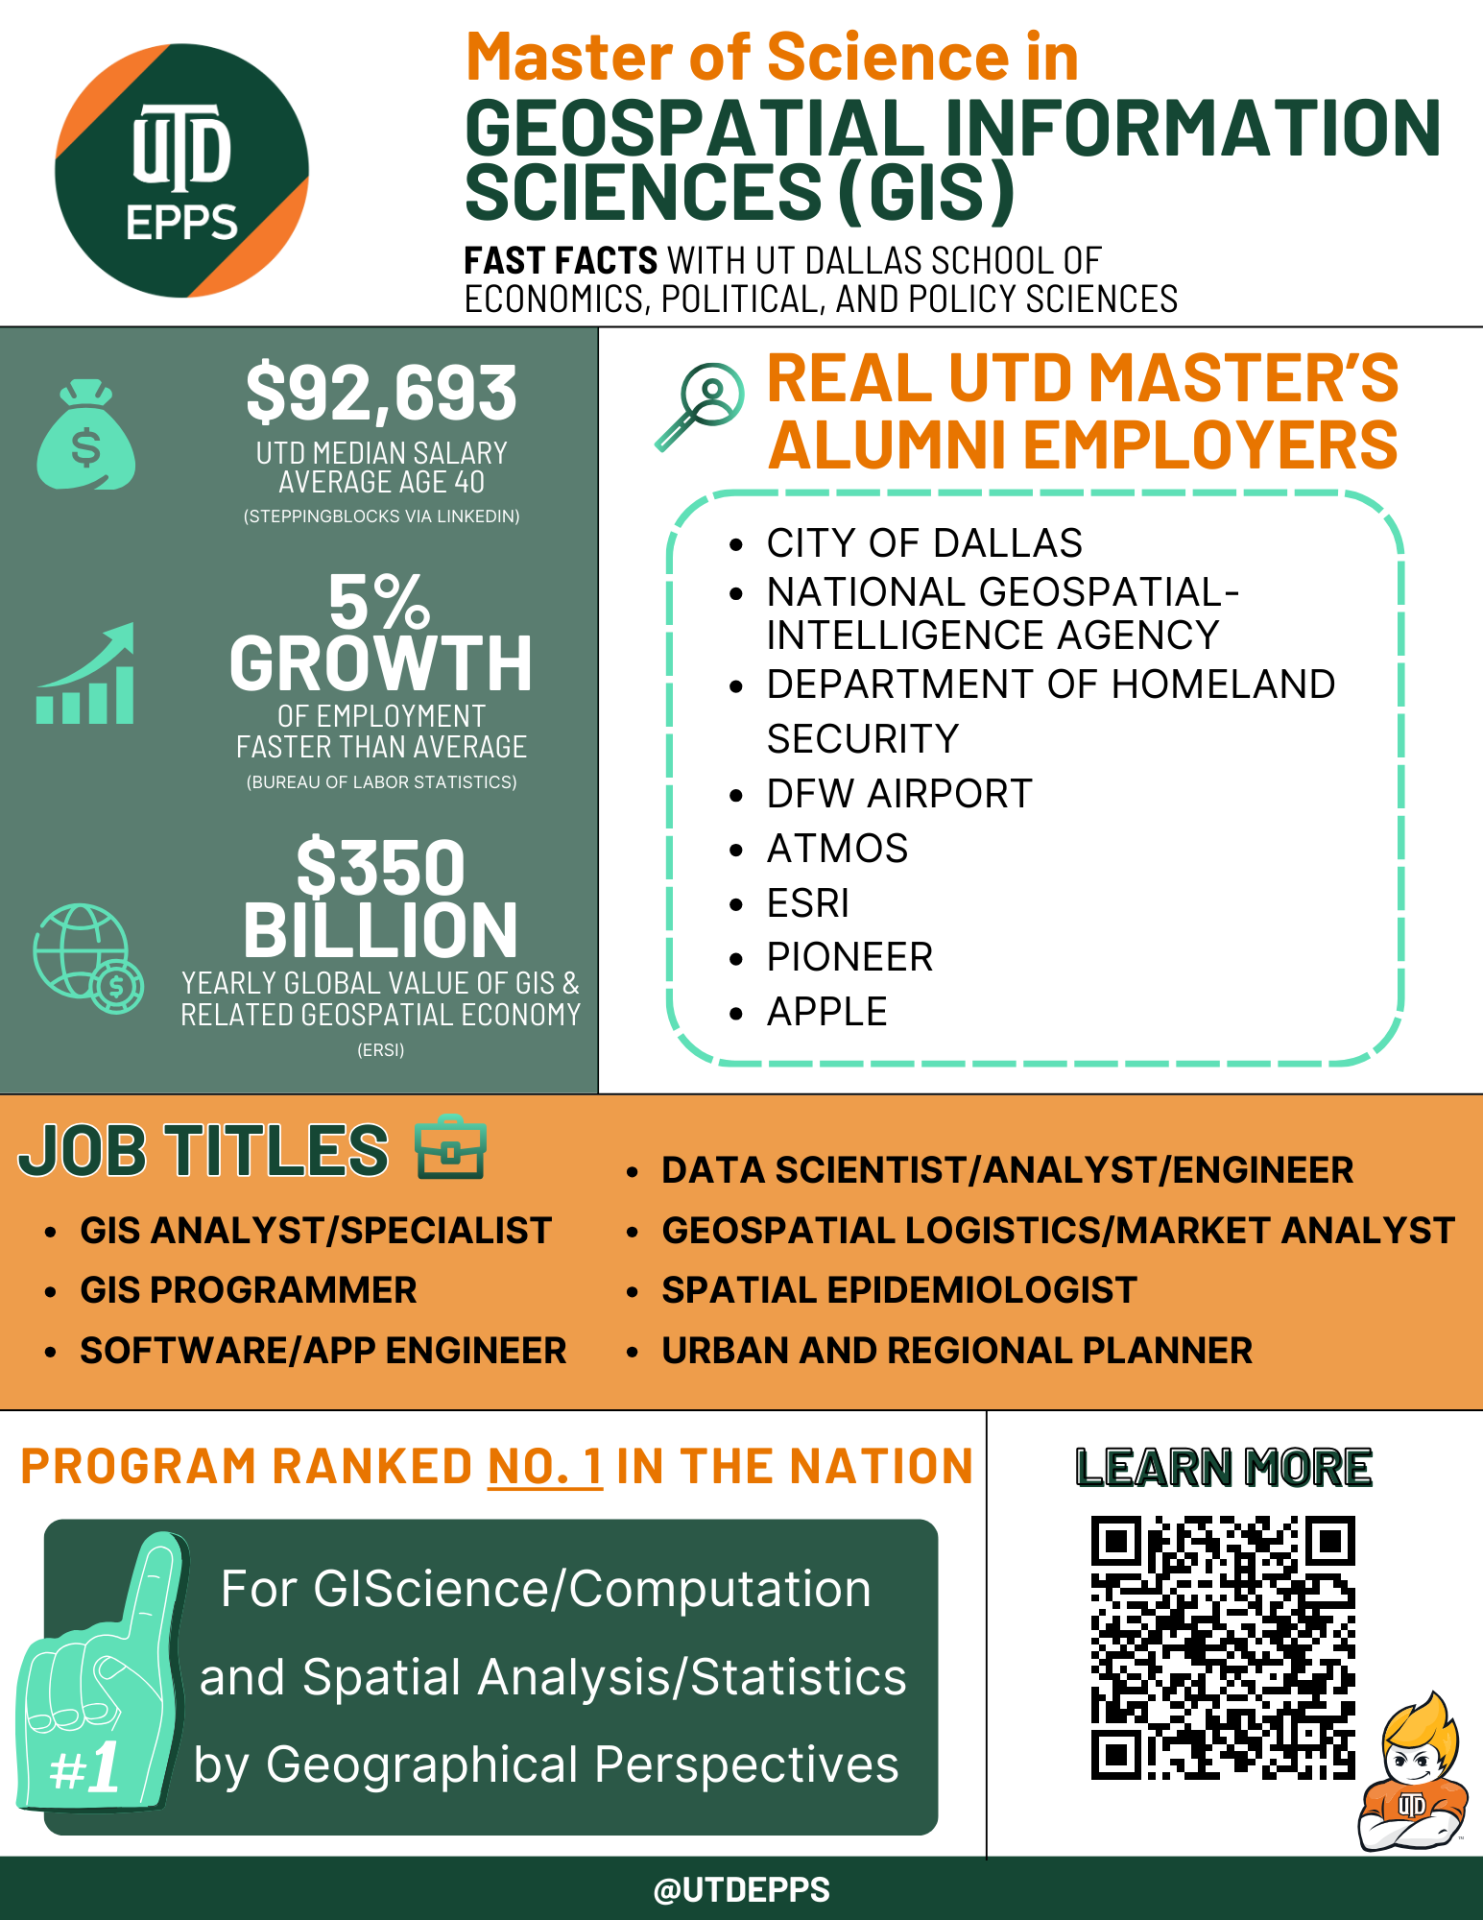 Master of Science in
GEOSPATIAL INFORMATION SCIENCES (GIS). Fast Facts with Ut Dallas school of economics, political, and policy sciences.

,693 is the UTD Median Salary
(Average age 40). Data is from Steppingblocks via LINKEDIN. 5% Growth OF EMPLOYMENT which is FASTER THAN AVERAGE. Data is from Bureau of Labor Statistics. 
0 BILLION YEARLY GLOBAL VALUE OF GIS & RELATED GEOSPATIAL ECONOMY. Data is from ERSI. 

REAL UTD MASTER’S ALUMNI EMPLOYERS include:
City of Dallas
National Geospatial-Intelligence Agency
Department of Homeland Security
DFW Airport
Atmos
Esri
Pioneer
Apple


Job titles include: 
GIS Analyst/Specialist
GIS Programmer
Software/App Engineer
Data Scientist/Analyst/Engineer
Geospatial Logistics/Market Analyst
Spatial Epidemiologist
Urban and Regional Planner

Program ranked No. 1 in the nation for GIScience/Computation and Spatial Analysis/Statistics by Geographical Perspectives. Data is from BUREAU OF LABOR STATISTICS.

LEARN MORE by scanning the QR code. 

@UTDEPPS